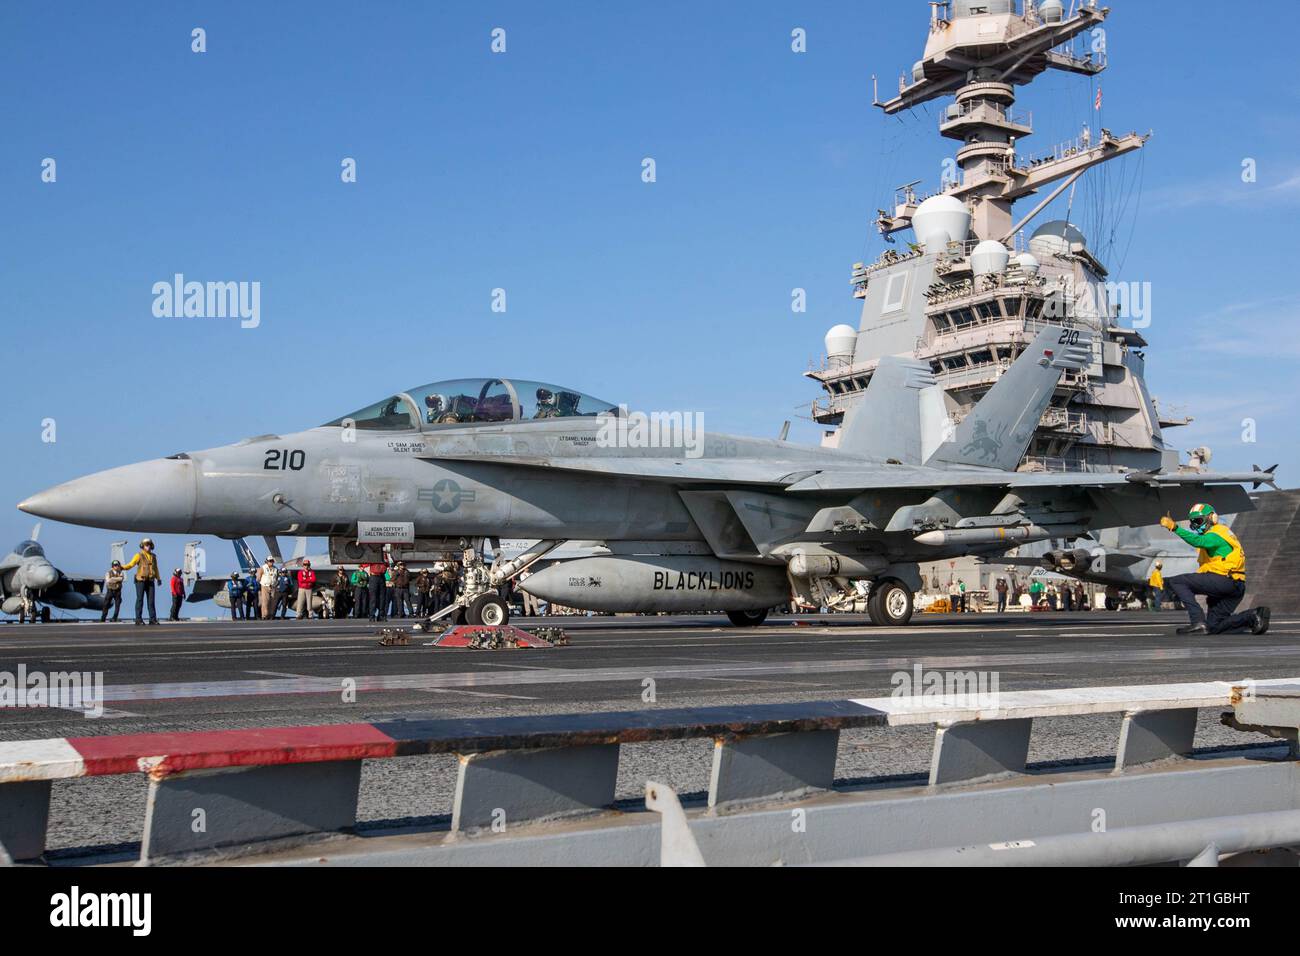 Mediterranean Sea. 11th Oct, 2023. An F/A-18F Super Hornet, attached to the Blacklions of Strike Fighter Squadron (VFA) 213, prepares to launch from the flight deck of the worlds largest aircraft carrier USS Gerald R. Ford (CVN 78) in the Eastern Mediterranean Sea, Oct. 11, 2023. Gerald R. Ford is the U.S. Navy's newest and most advanced aircraft carrier, representing a generational leap in the U.S. Navy's capacity to project power on a global scale. The Gerald R. Ford Carrier Strike Group is currently operating in the Eastern Mediterranean Sea, at the direction of the Secretary of Defense Stock Photo